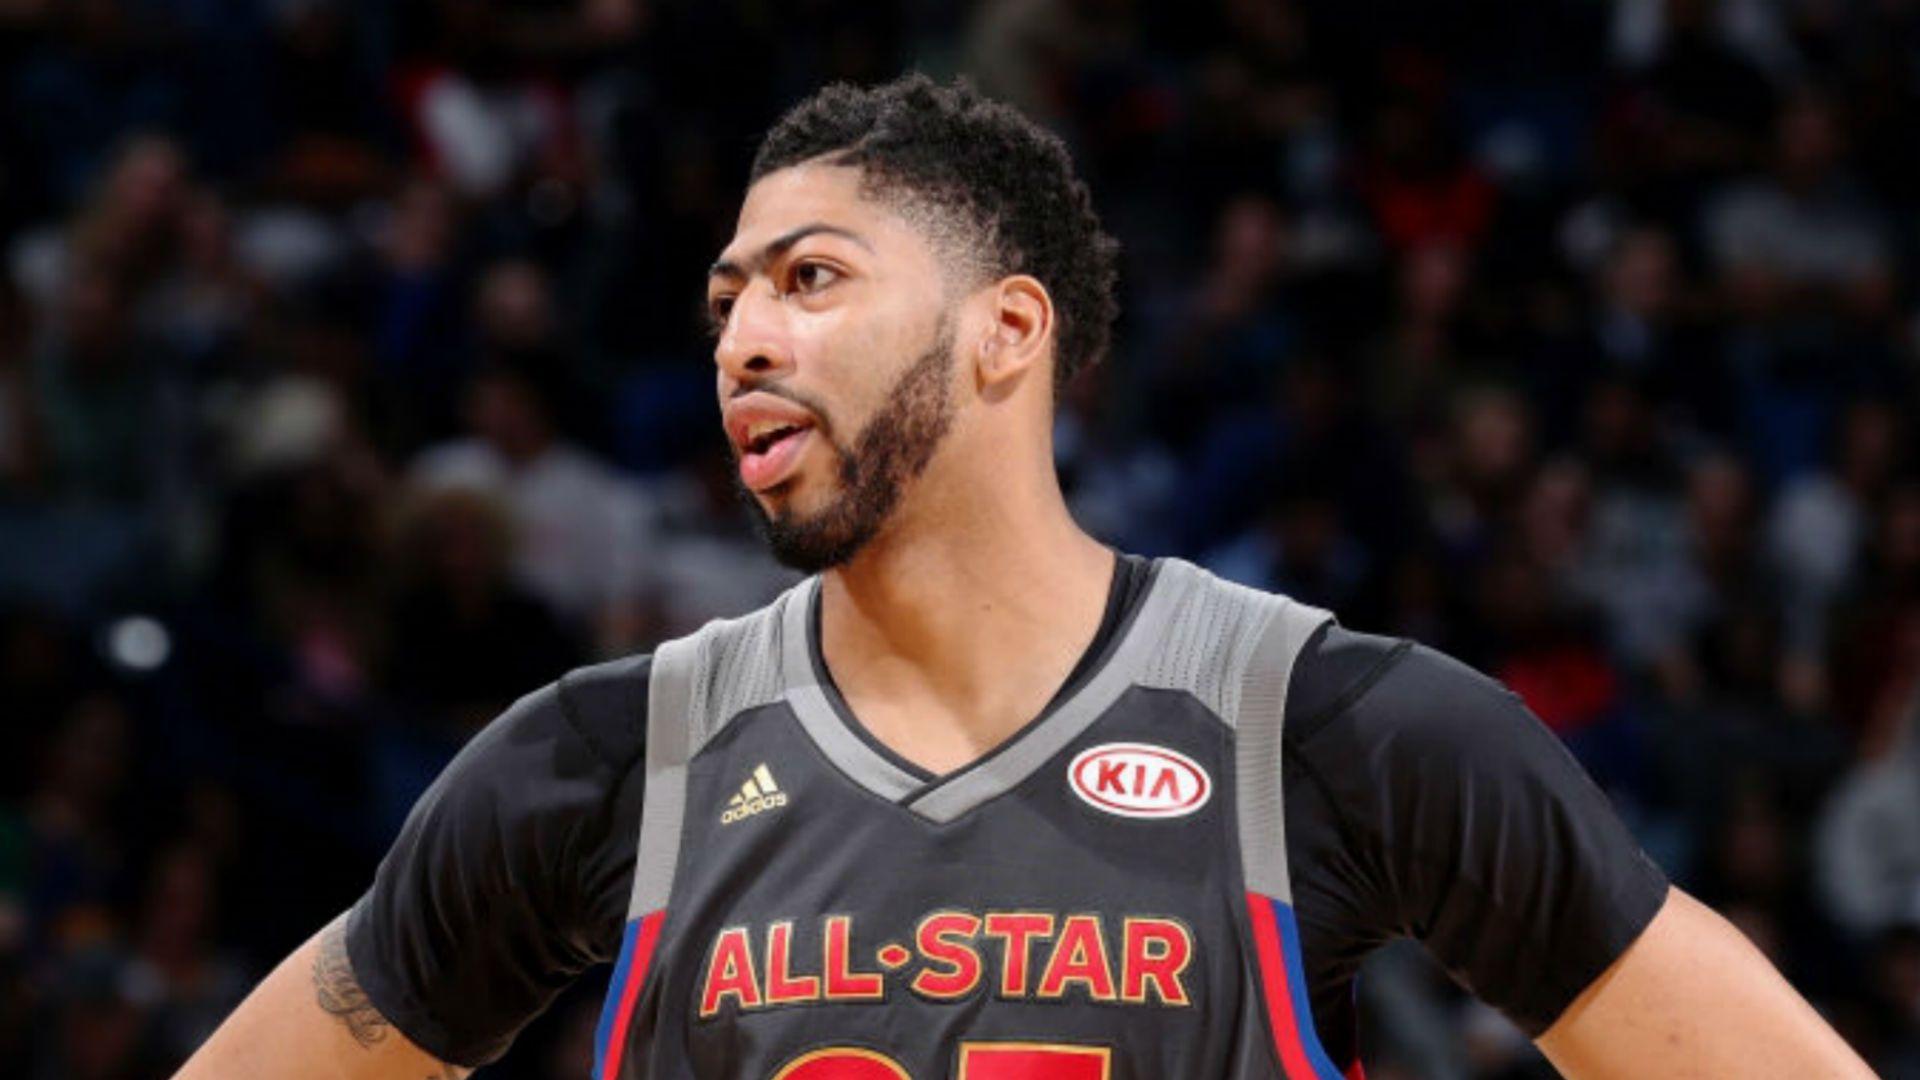 Pelicans' Anthony Davis Sets All Star Game Scoring Record To Win